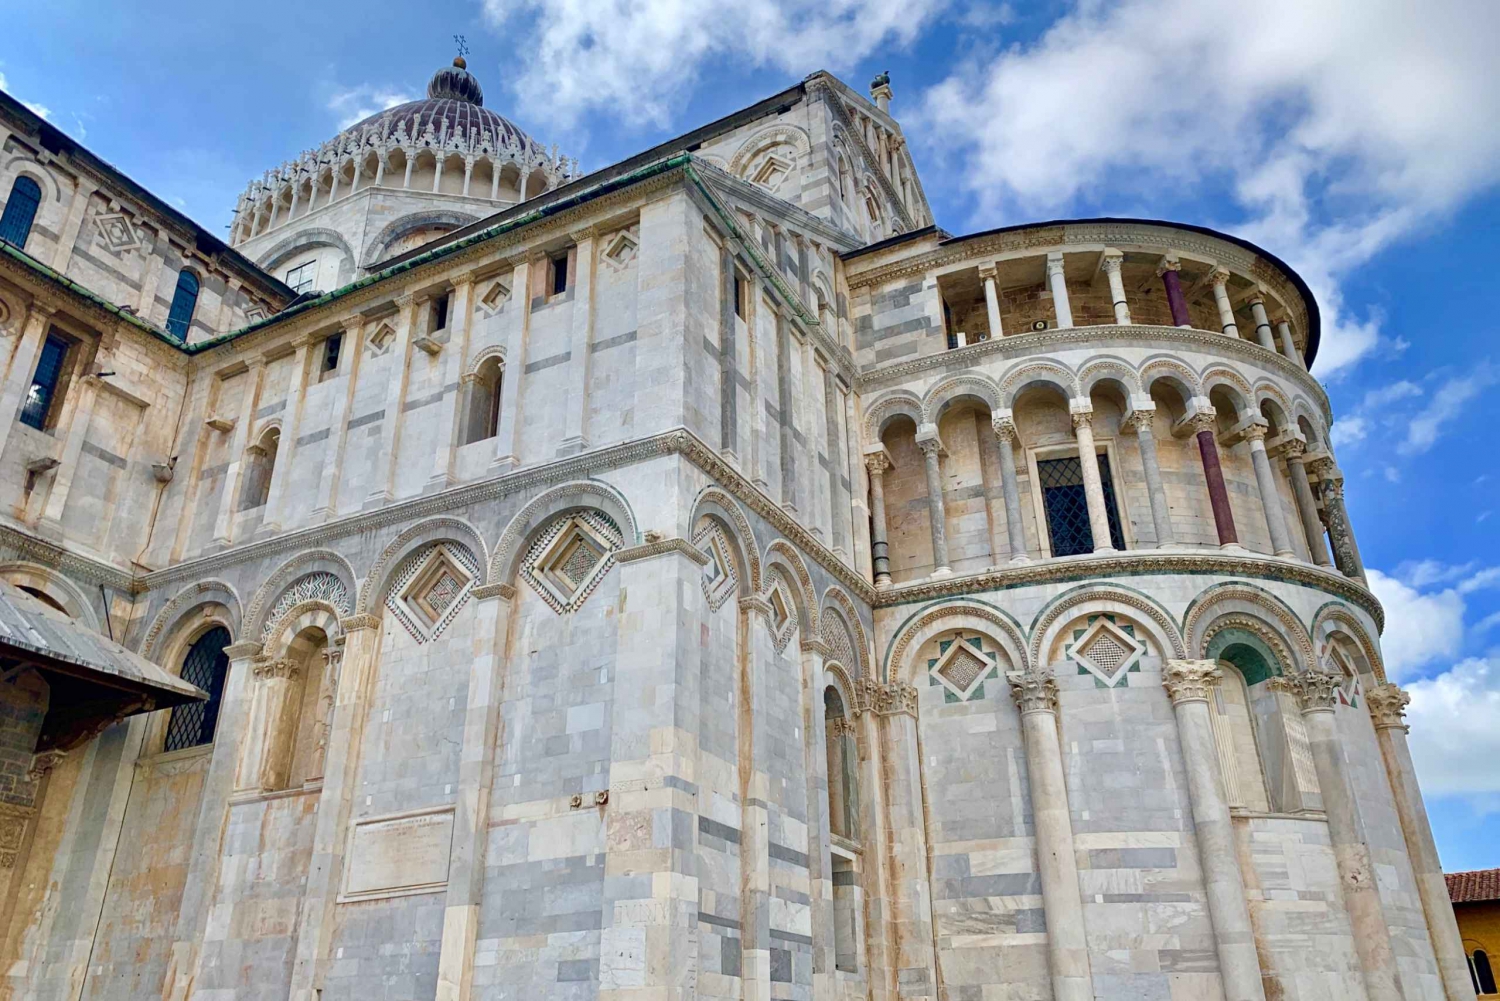 From Florence: Round-trip Transfer to Pisa & Cinque Terre